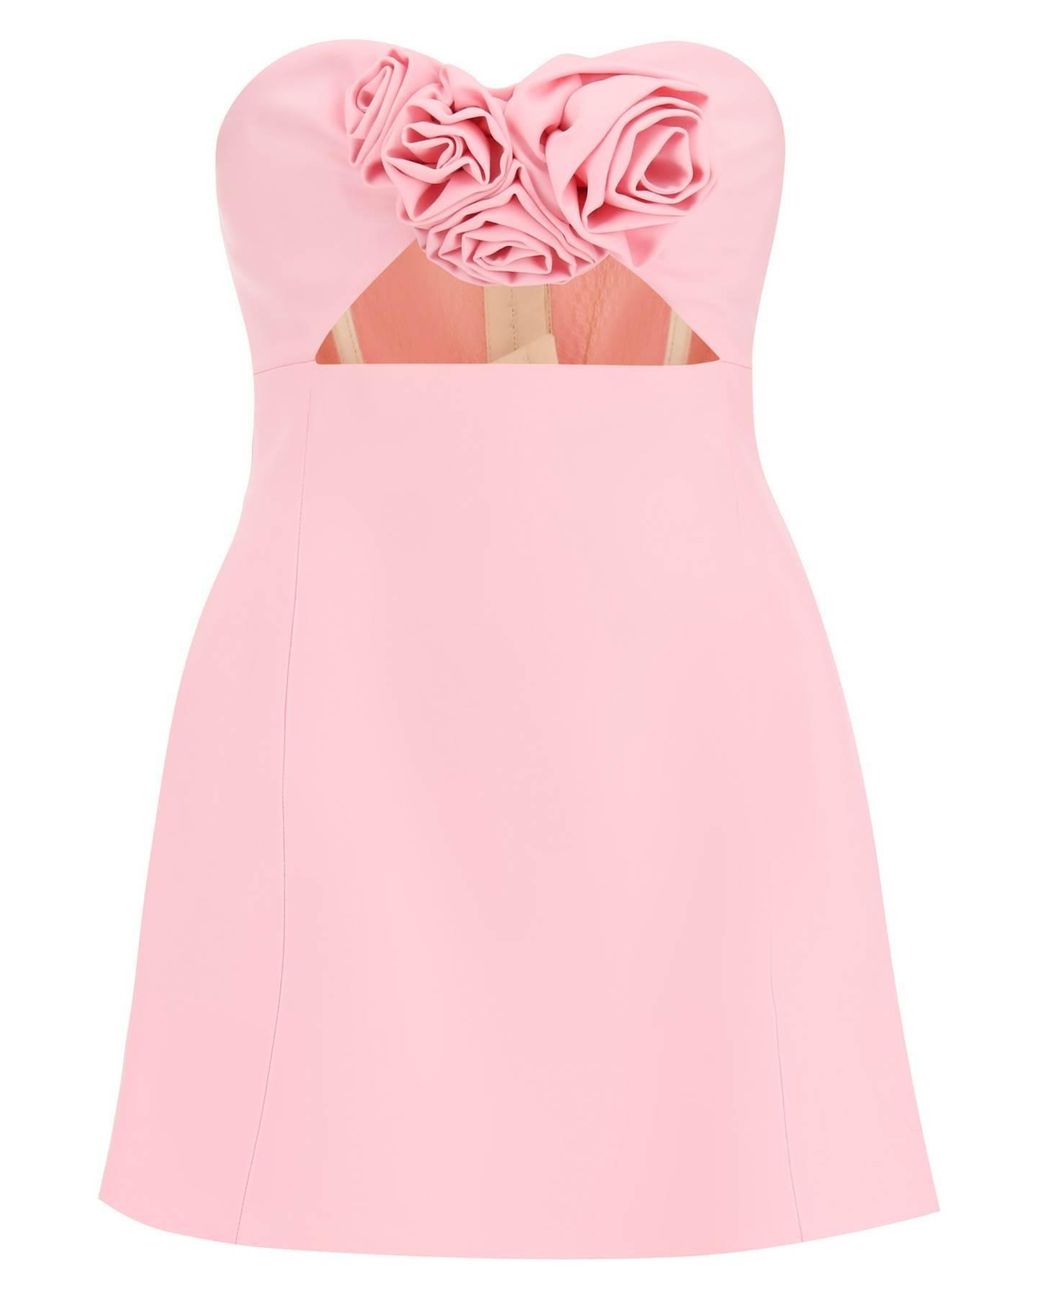 Magda Butrym Cut-out Rose Applique Mini Dress in Pink | Lyst